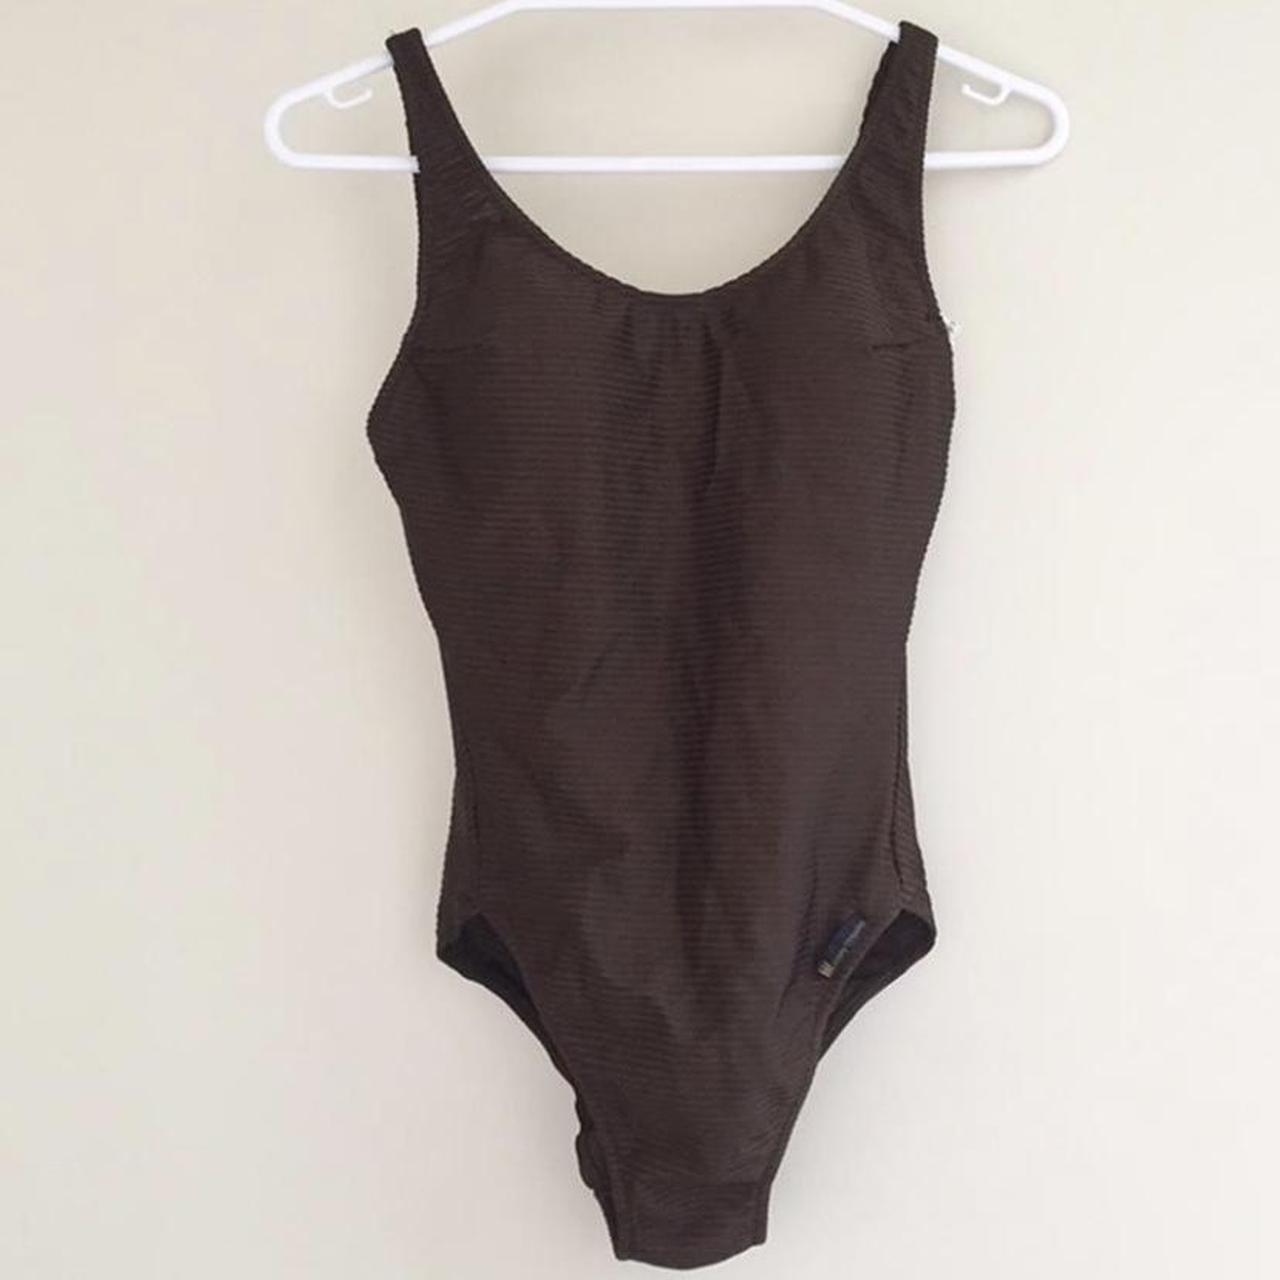 Issey miyake brown swim suit with low back. Little... - Depop